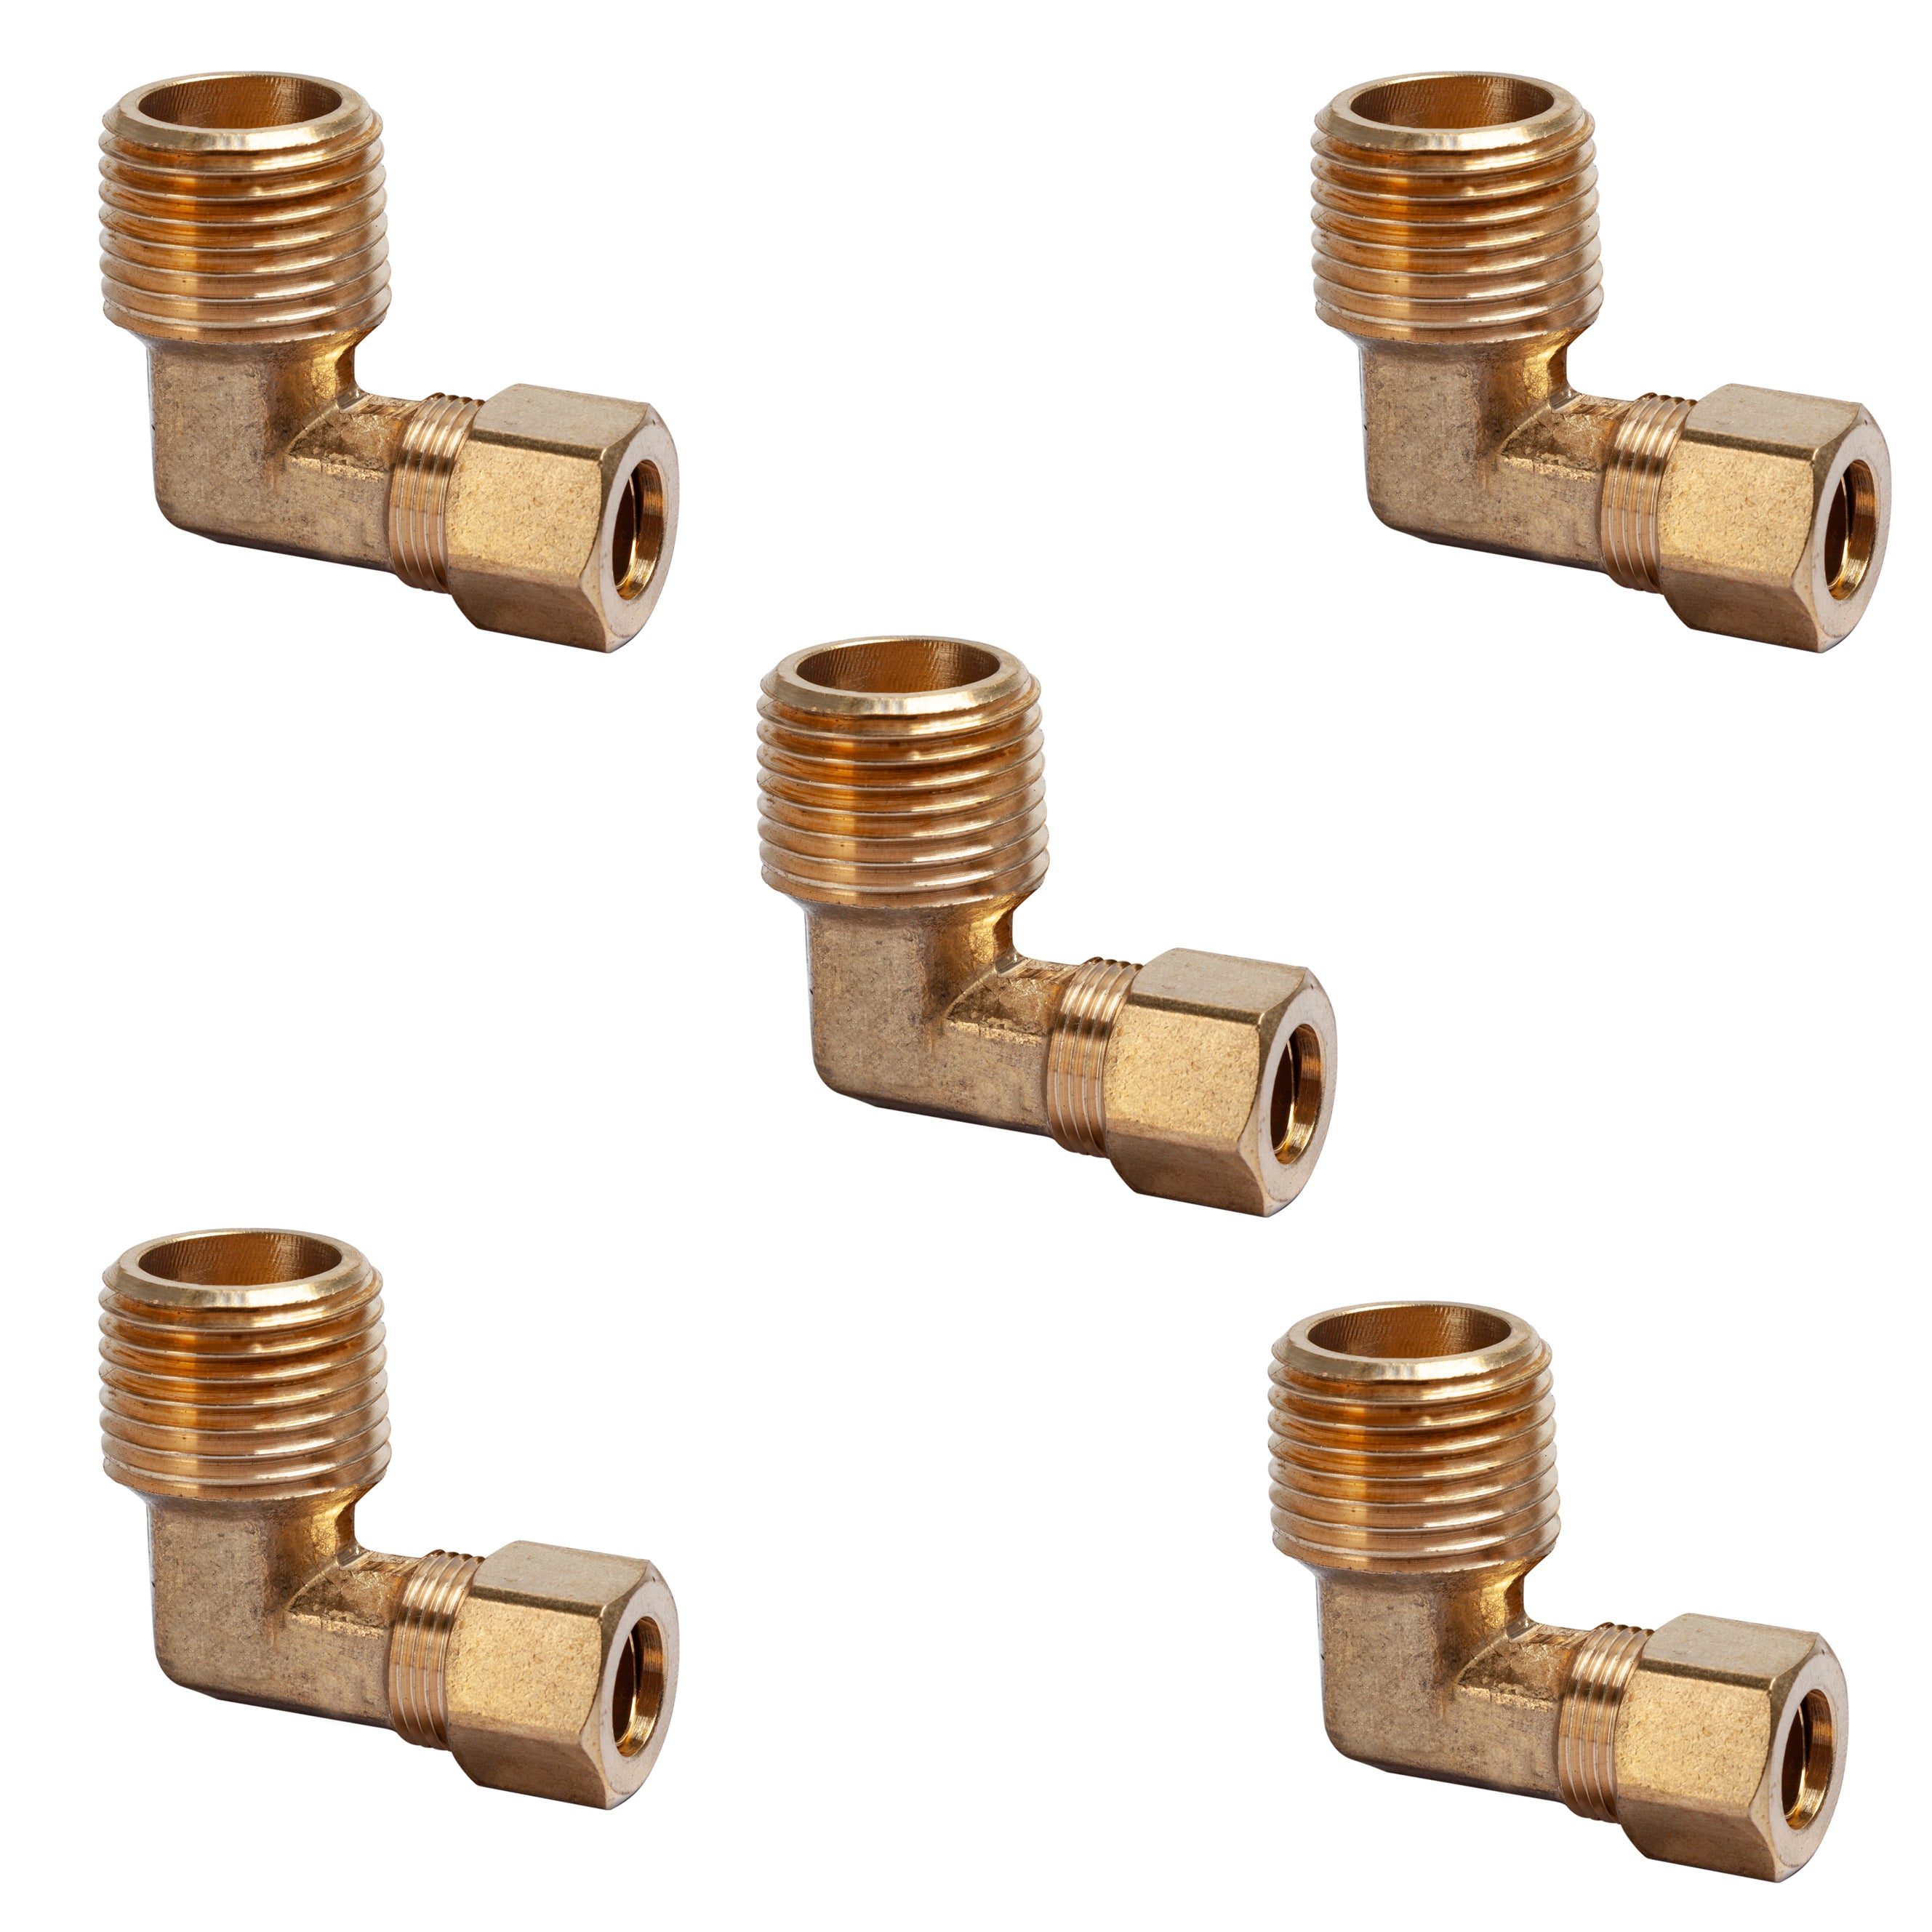 LTWFITTING 5/8-Inch OD x 3/8-Inch Male NPT 90 Degree Compression Elbow,Brass Compression Fitting(Pack of 5)